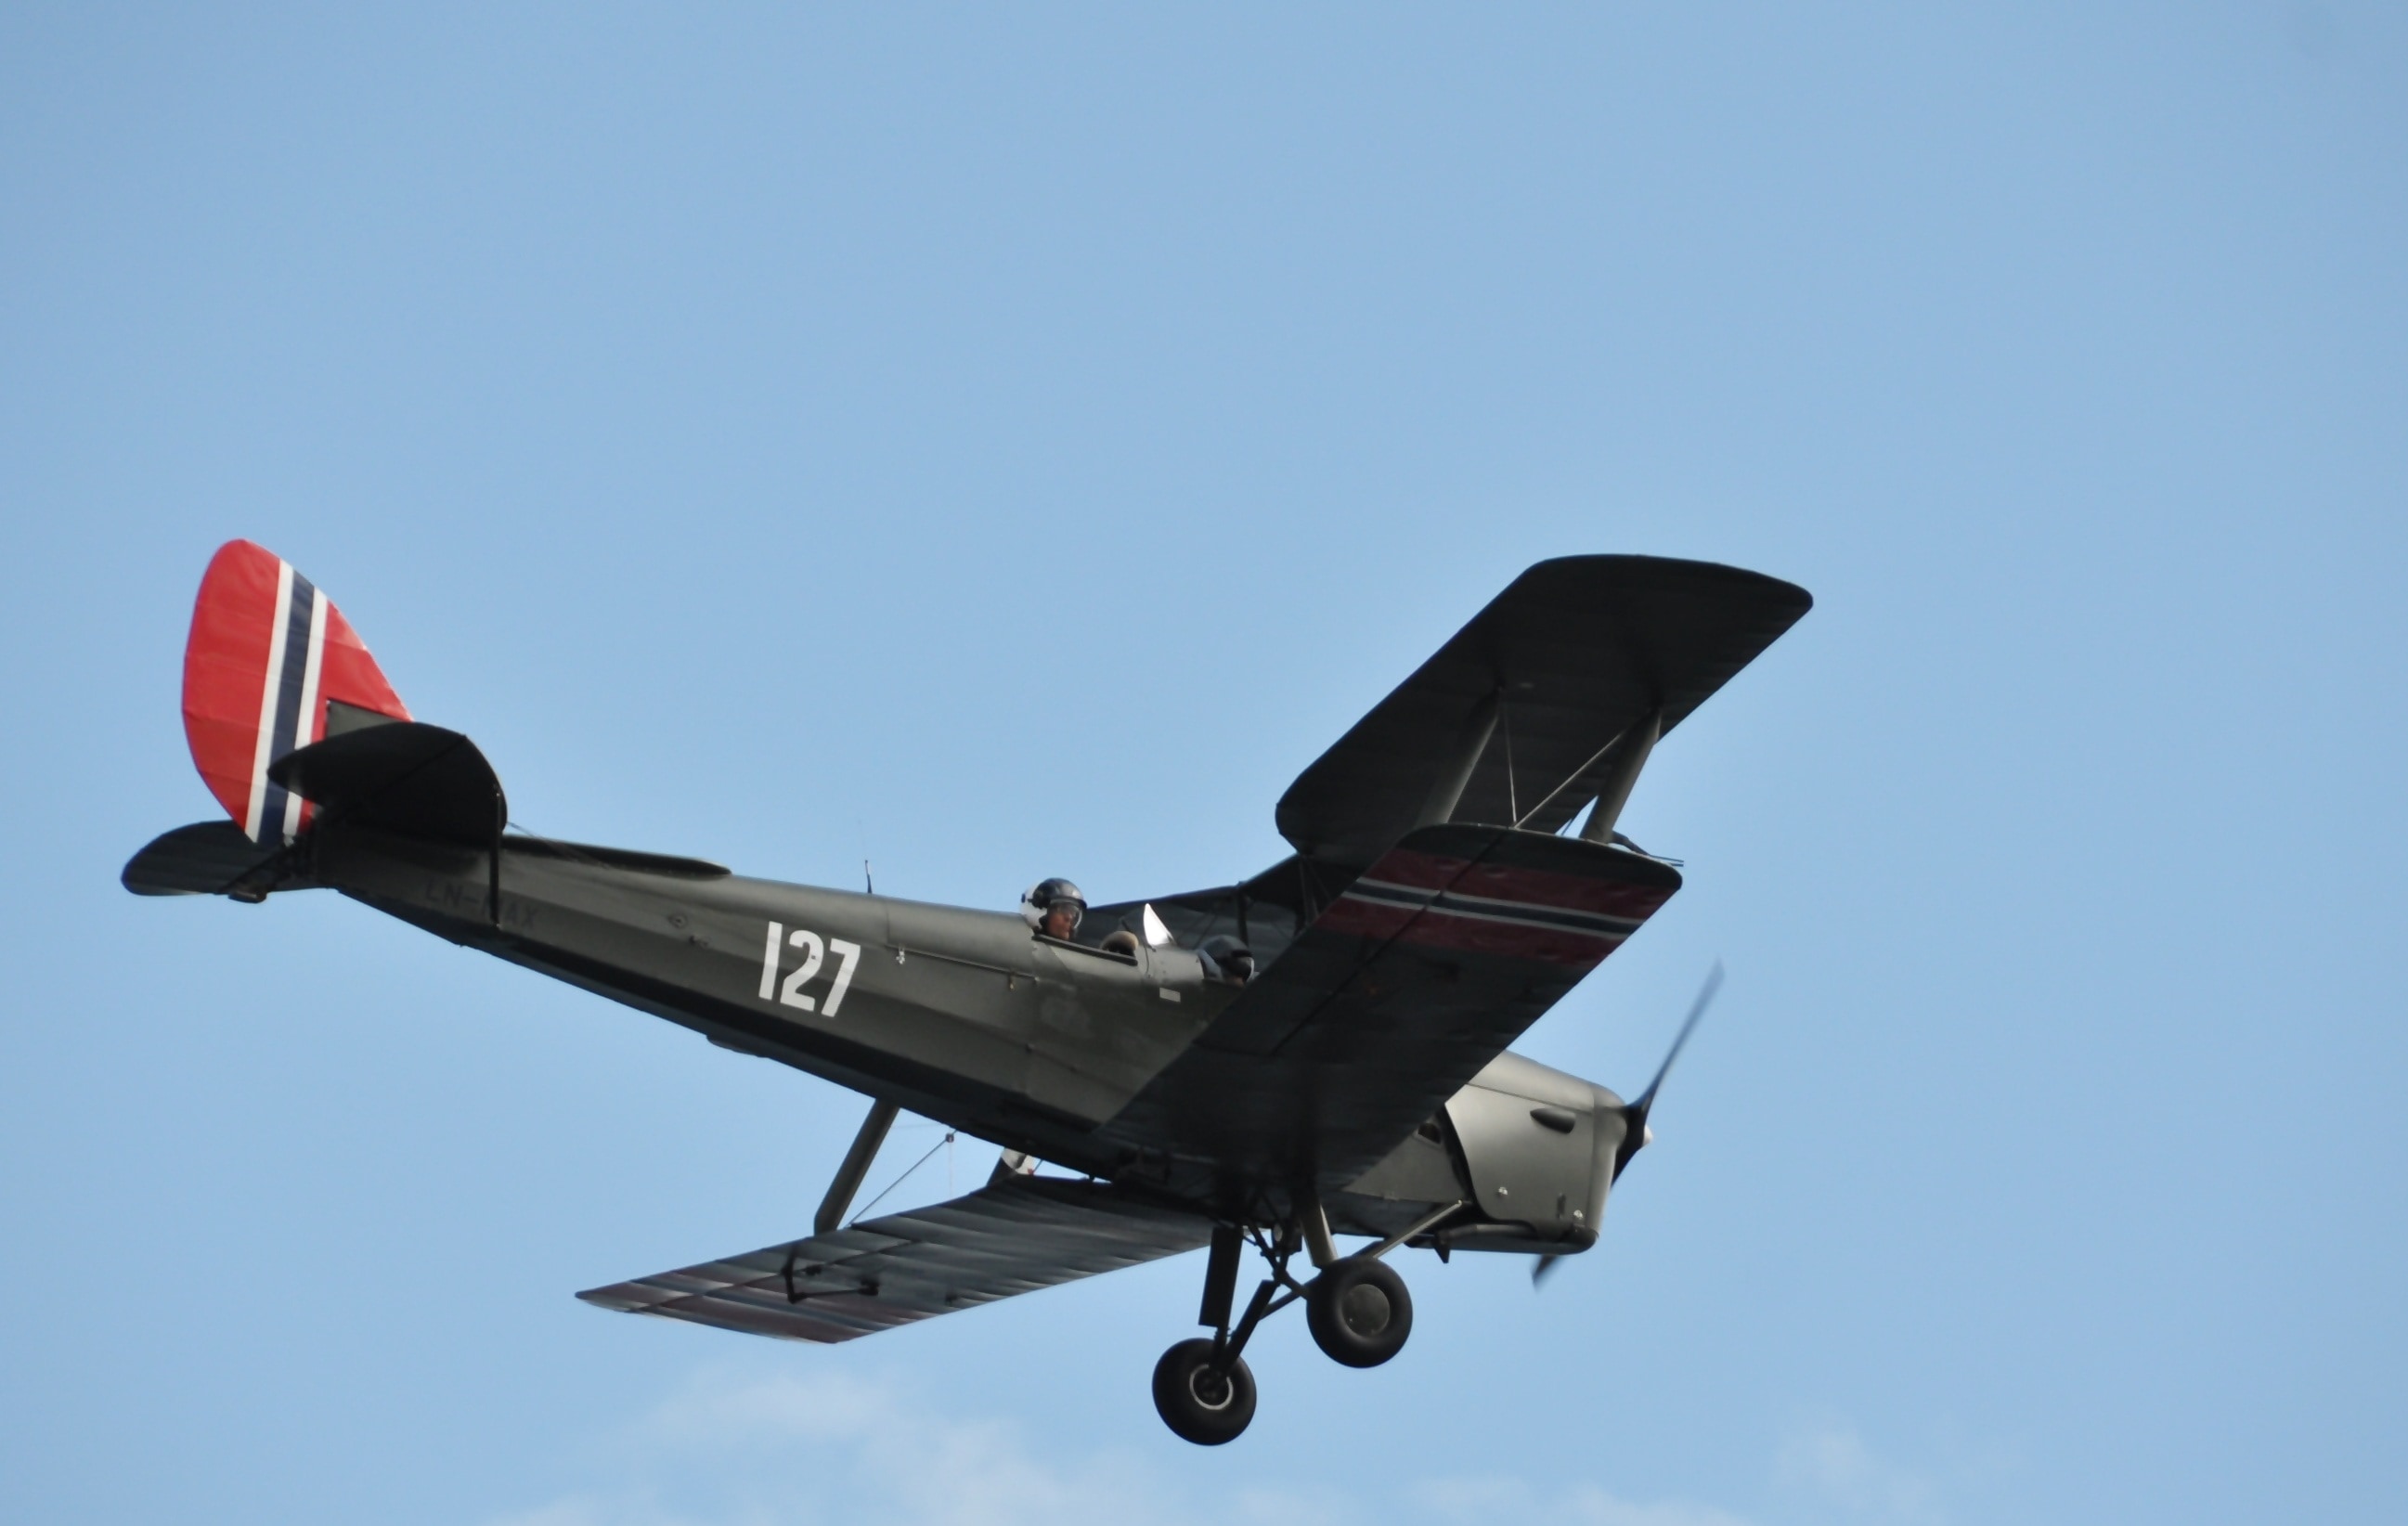 brown 127 plane flying during daytime under blue sky with white thin clouds